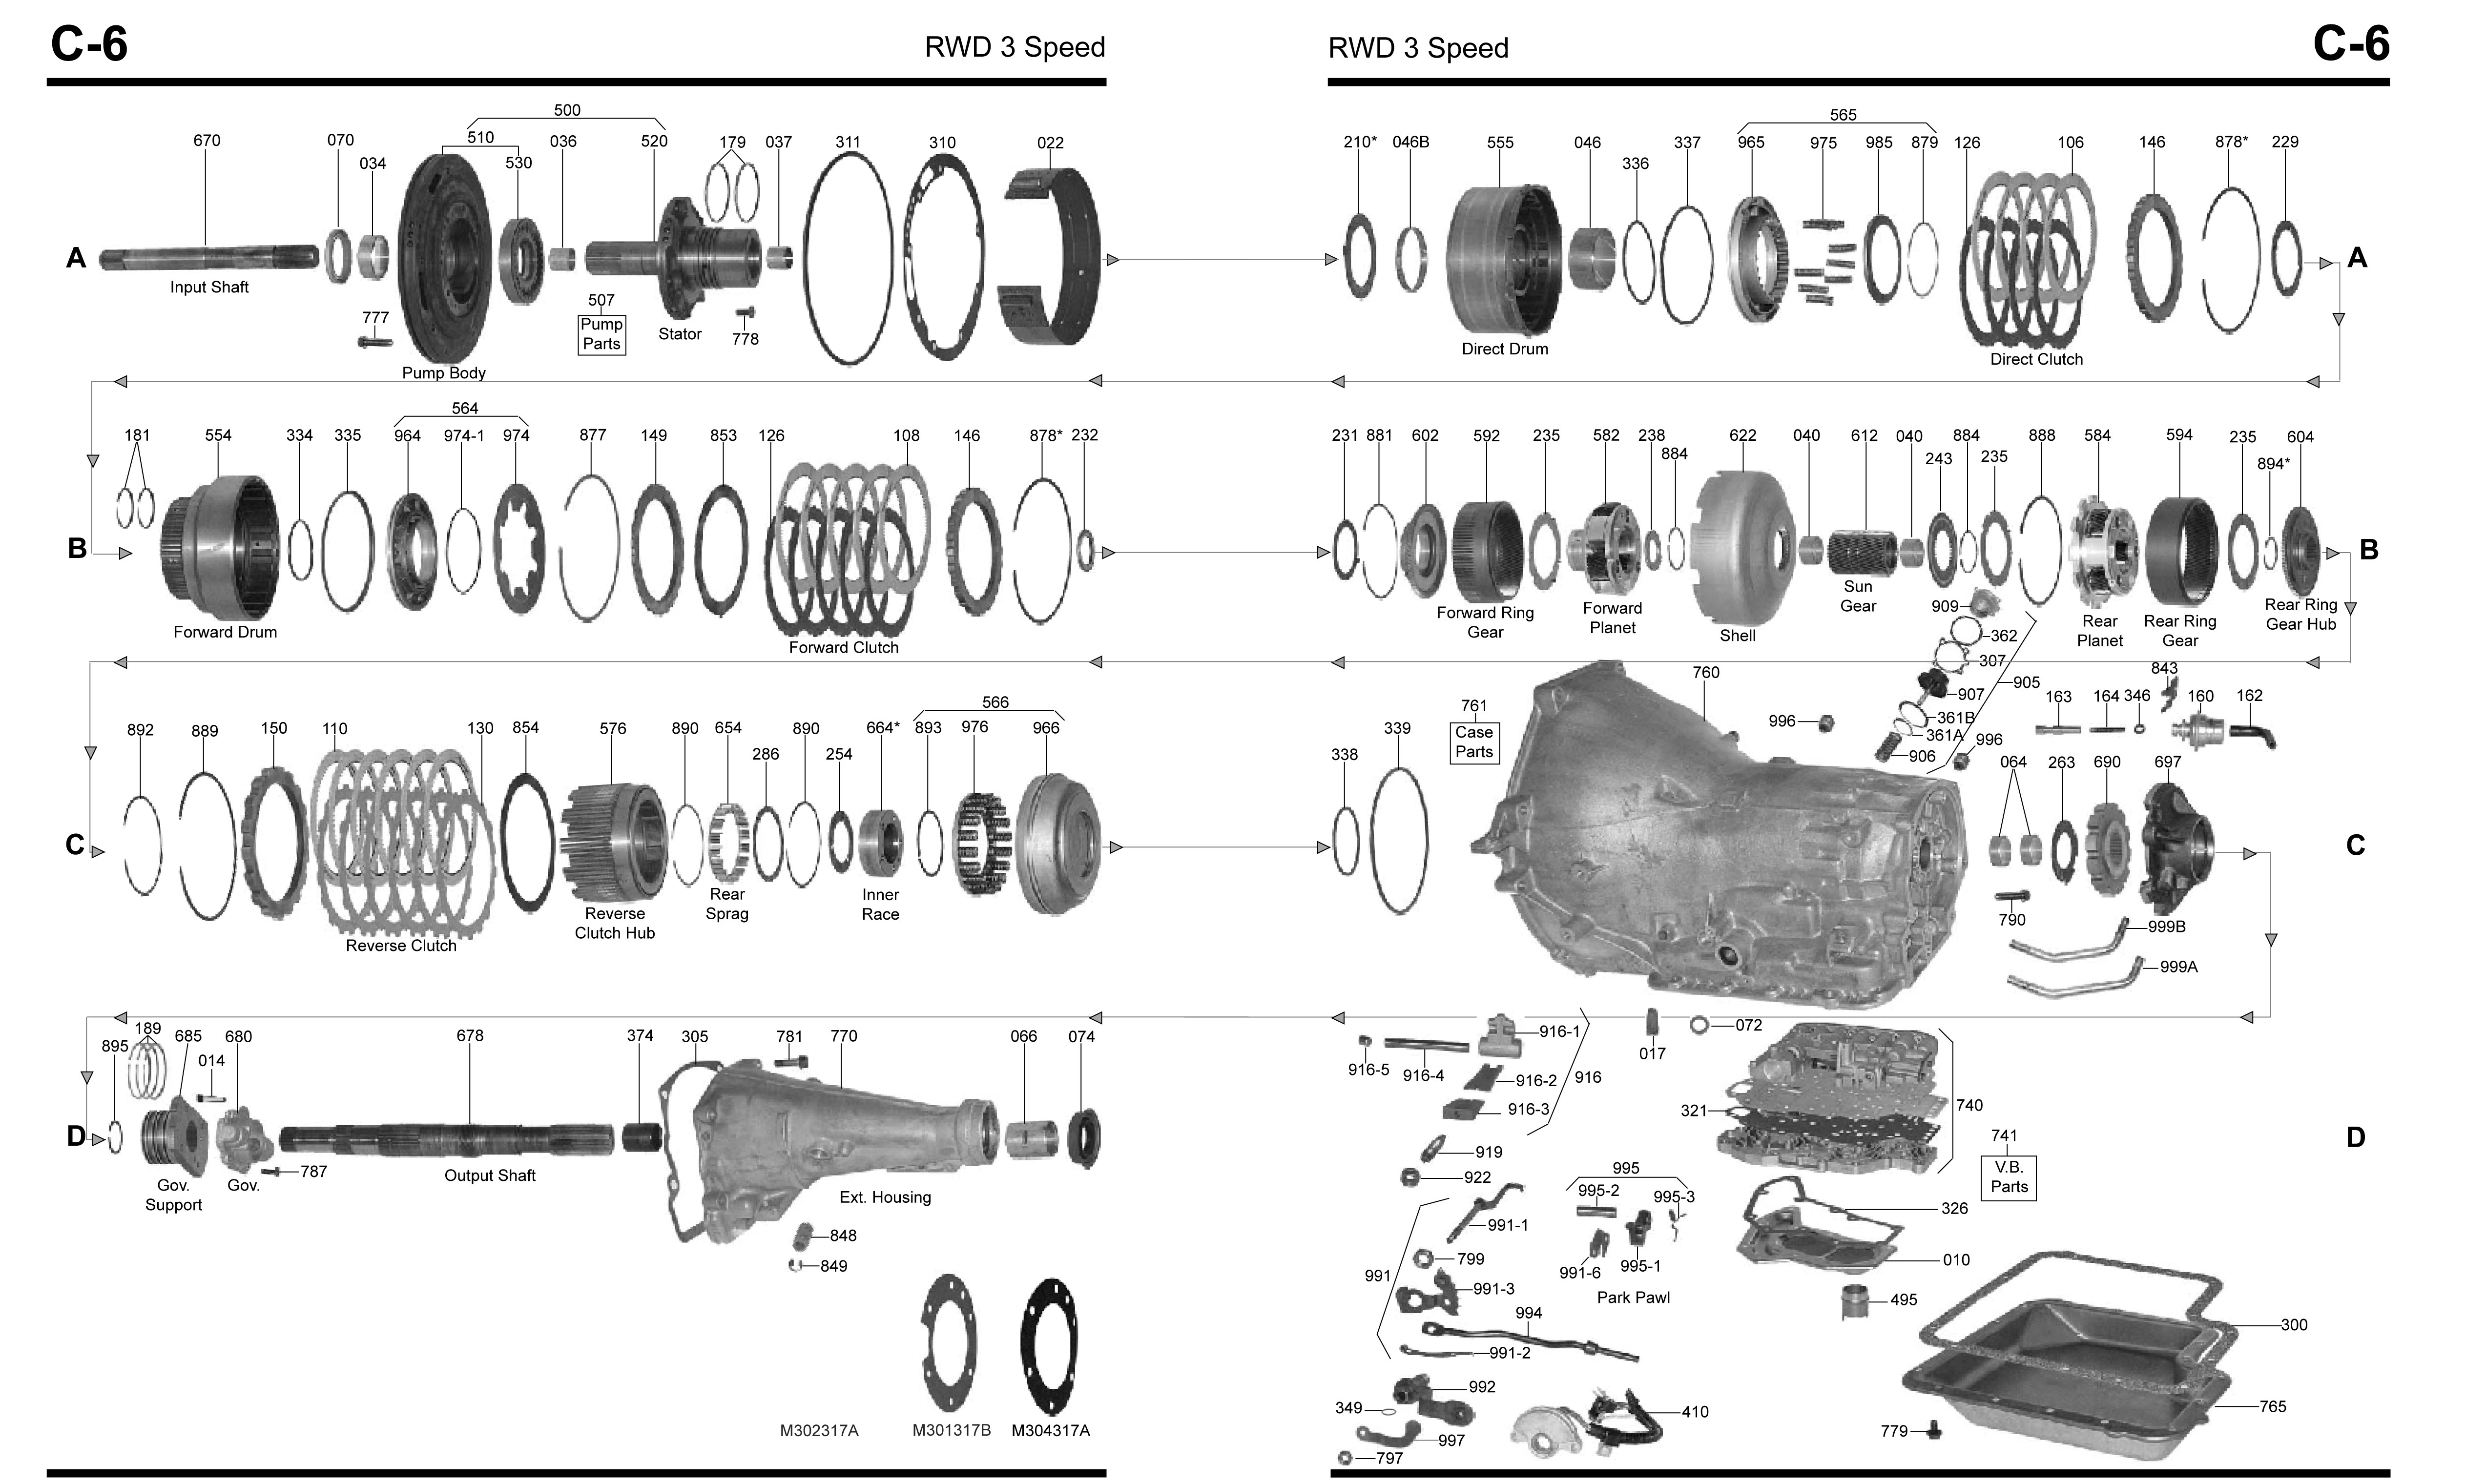 Diesel Engine Parts Diagram and Function E4od Rebuild Diagram Wiring Diagram Of Diesel Engine Parts Diagram and Function